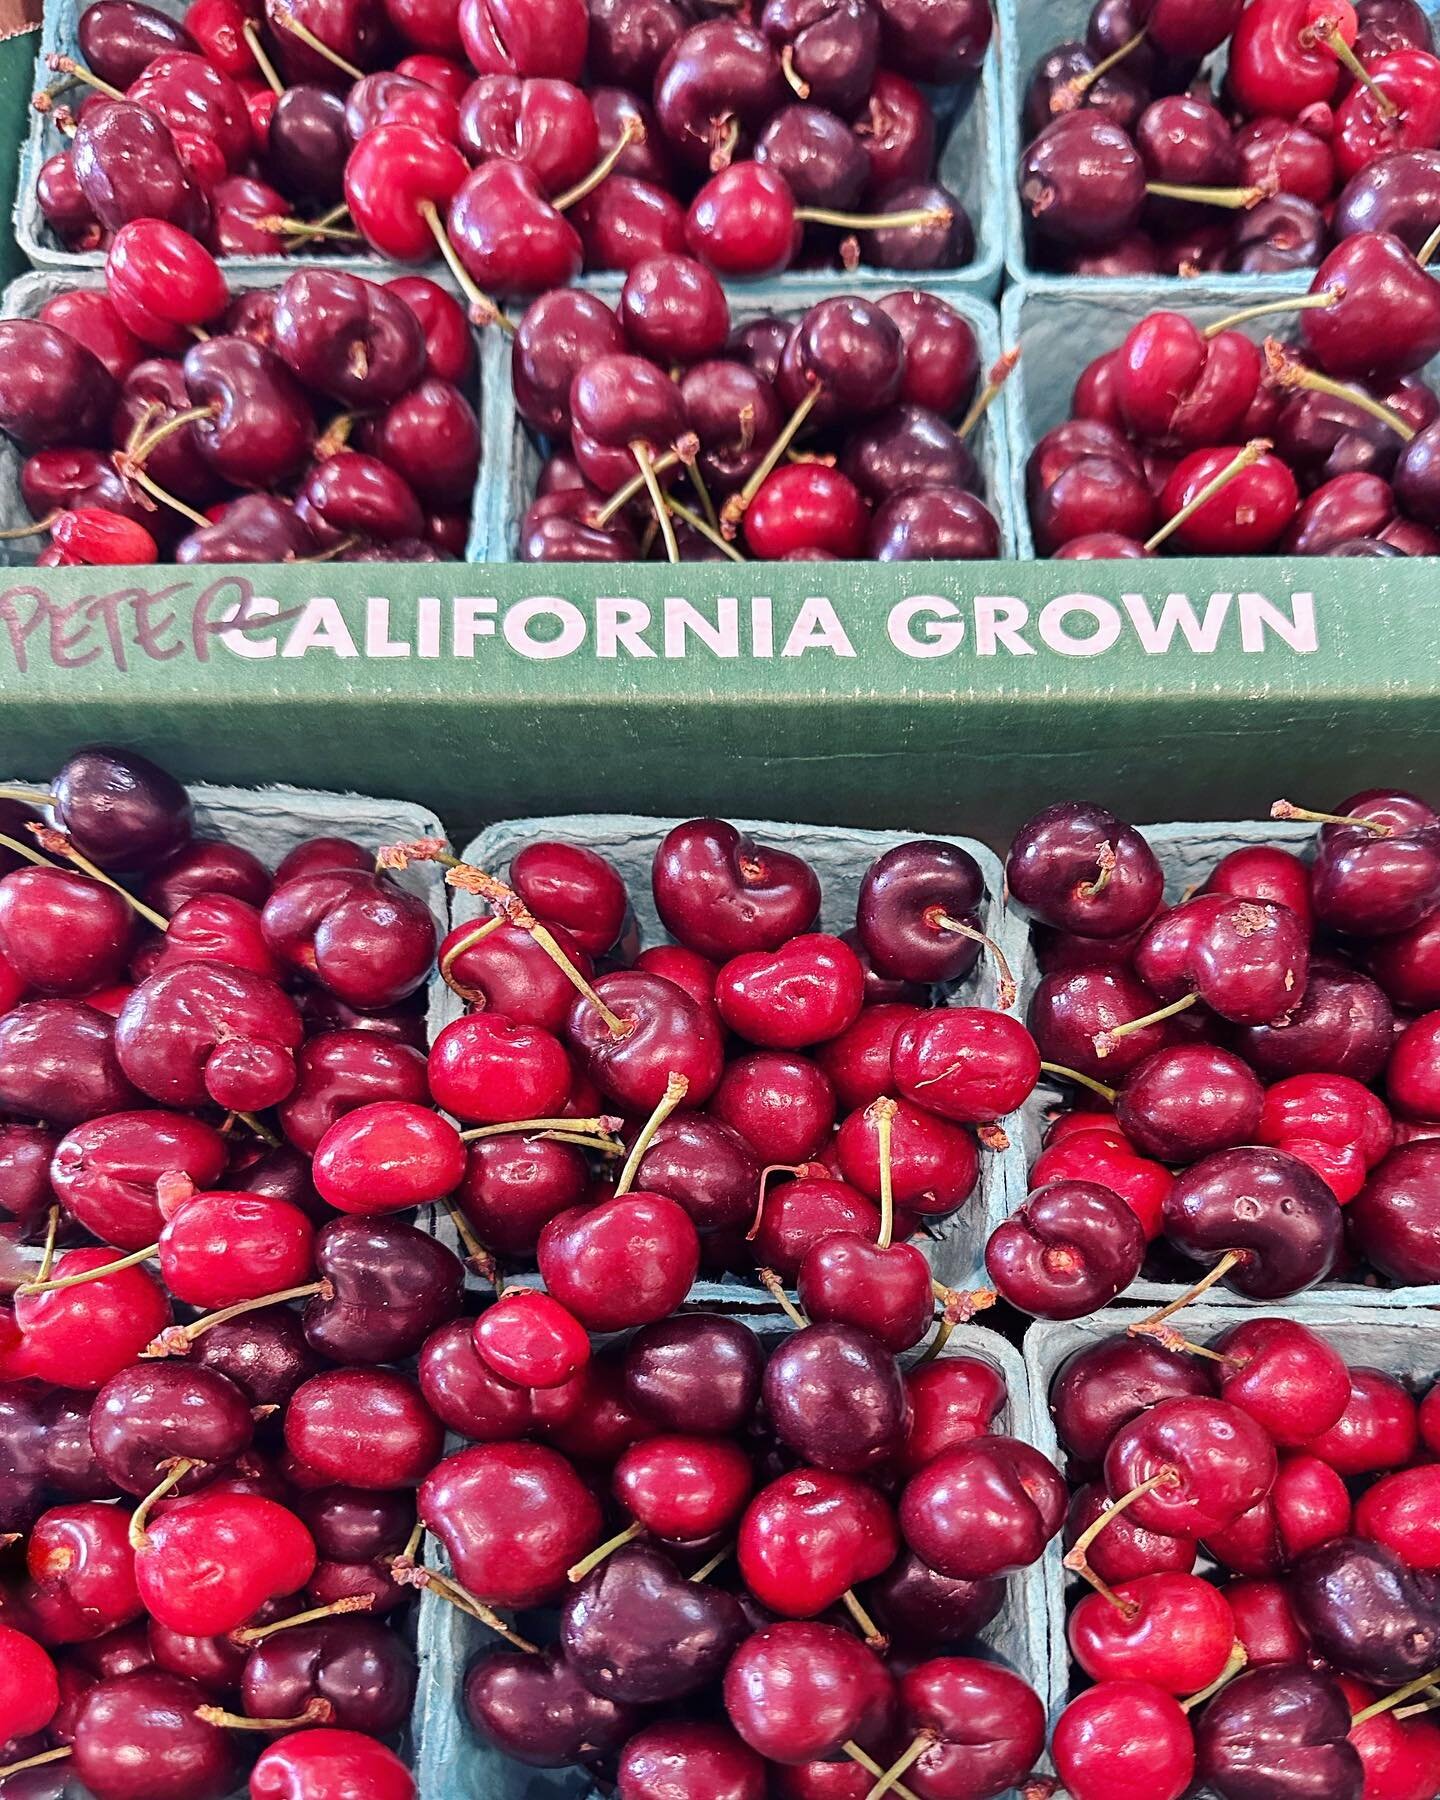 In California it&rsquo;s not just about cherries, it&rsquo;s about what kind of cherries? We have three varieties today, in celebration of the 🍒 season in earnest for the next few weeks we will have at least three varieties in store. 

Tasting notes